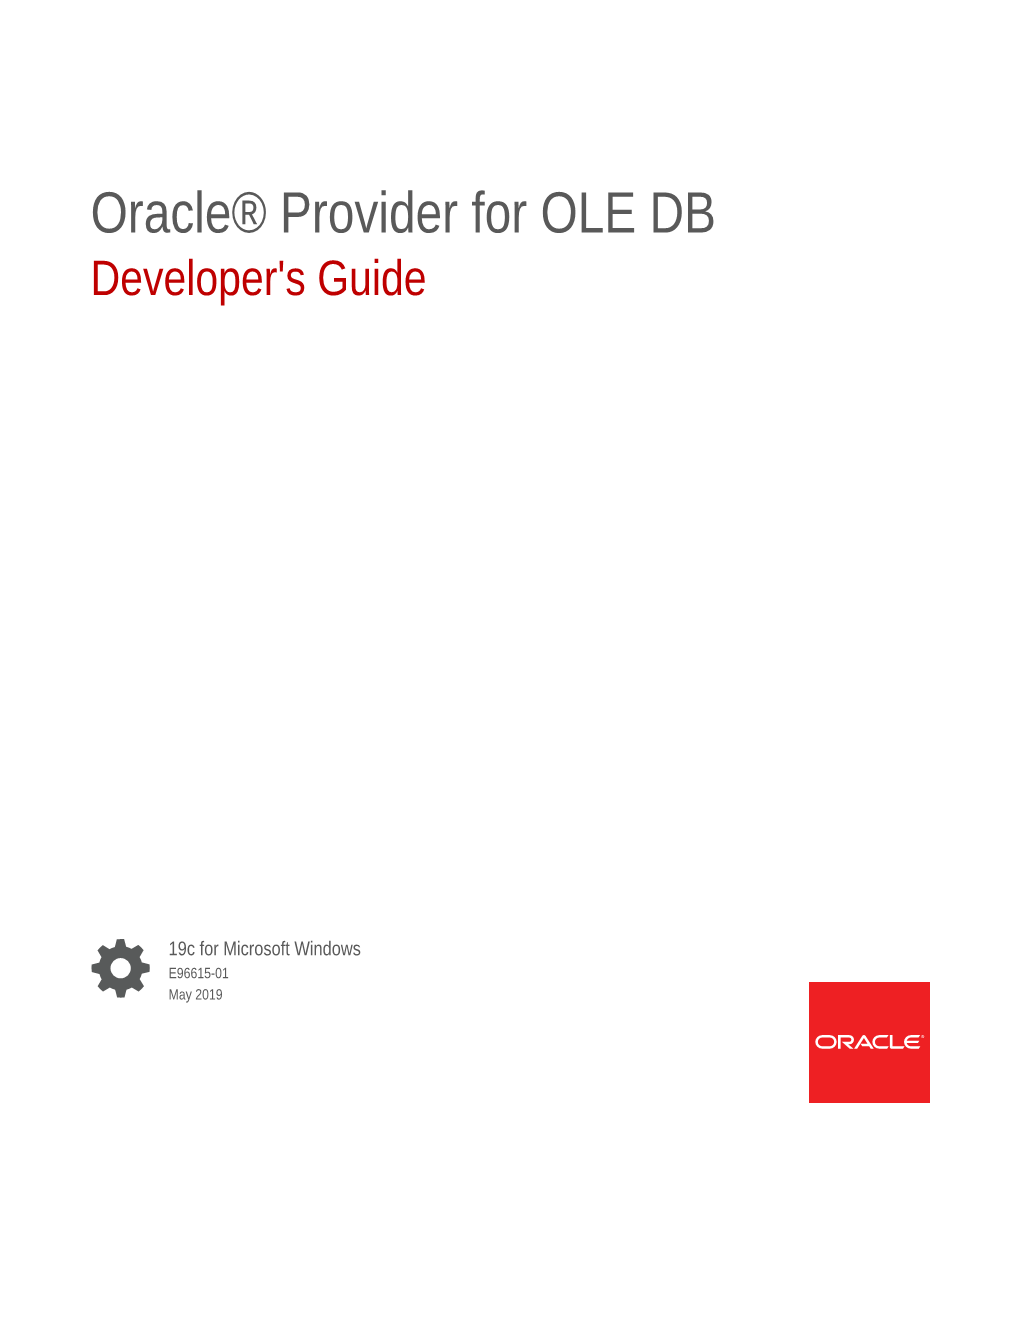 Oracle® Provider for OLE DB Developer's Guide